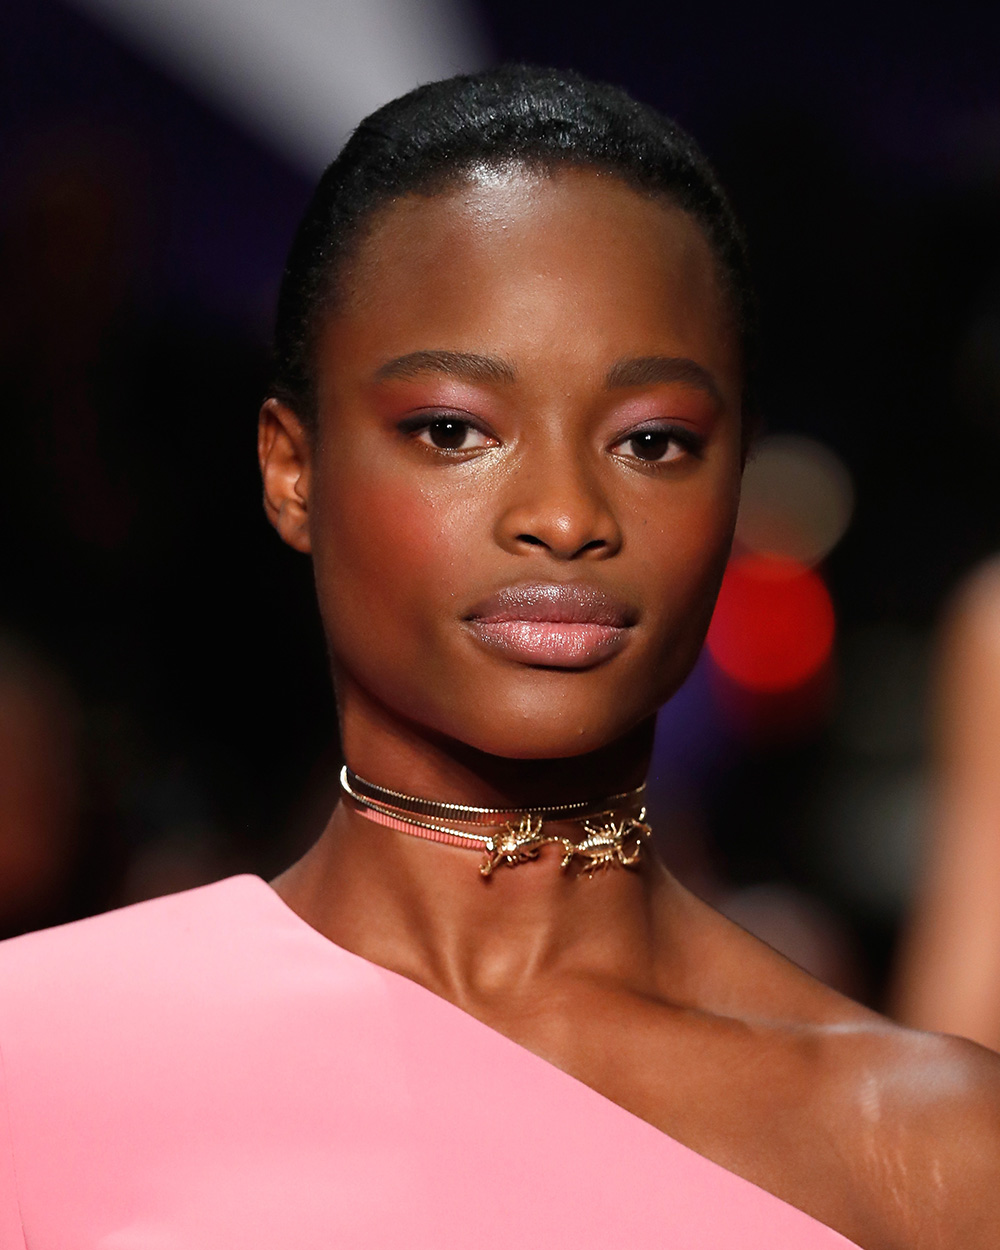 The best beauty looks from NYFW | Brandon Maxwell Understated pink lids, maroon liner and rosy cheeks were spotted on models like Gigi and Bella Hadid at Brandon Maxwell.